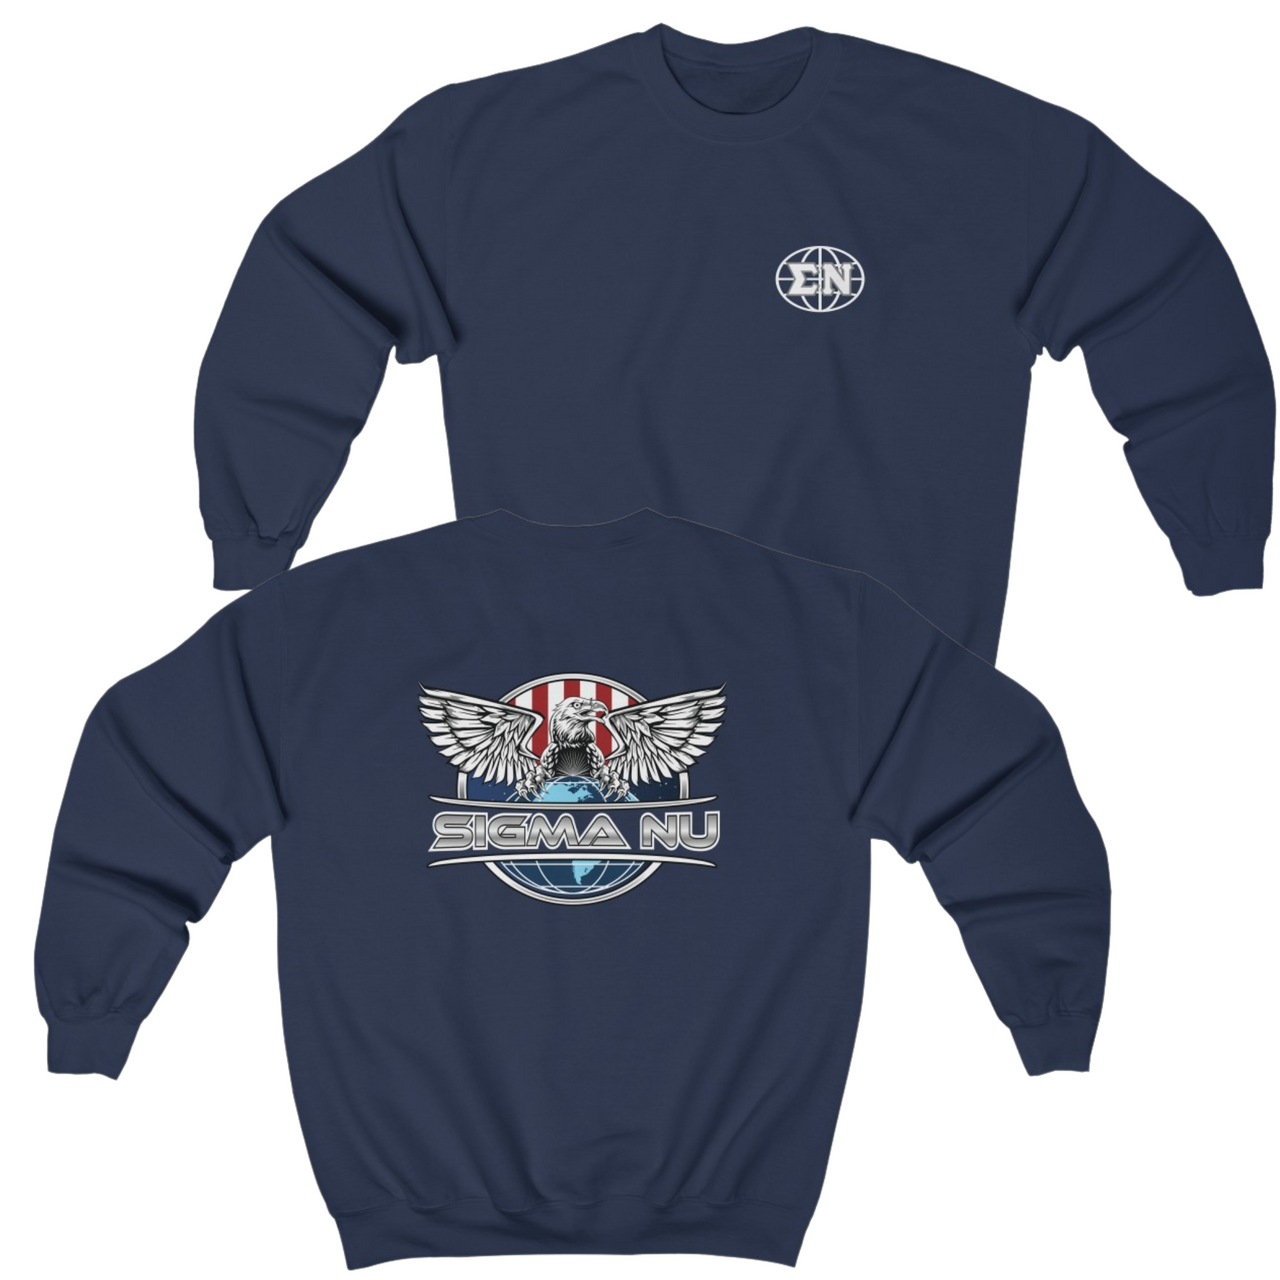 Navy Sigma Nu Graphic Crewneck Sweatshirt | The Fraternal Order | Sigma Nu Clothing, Apparel and Merchandise